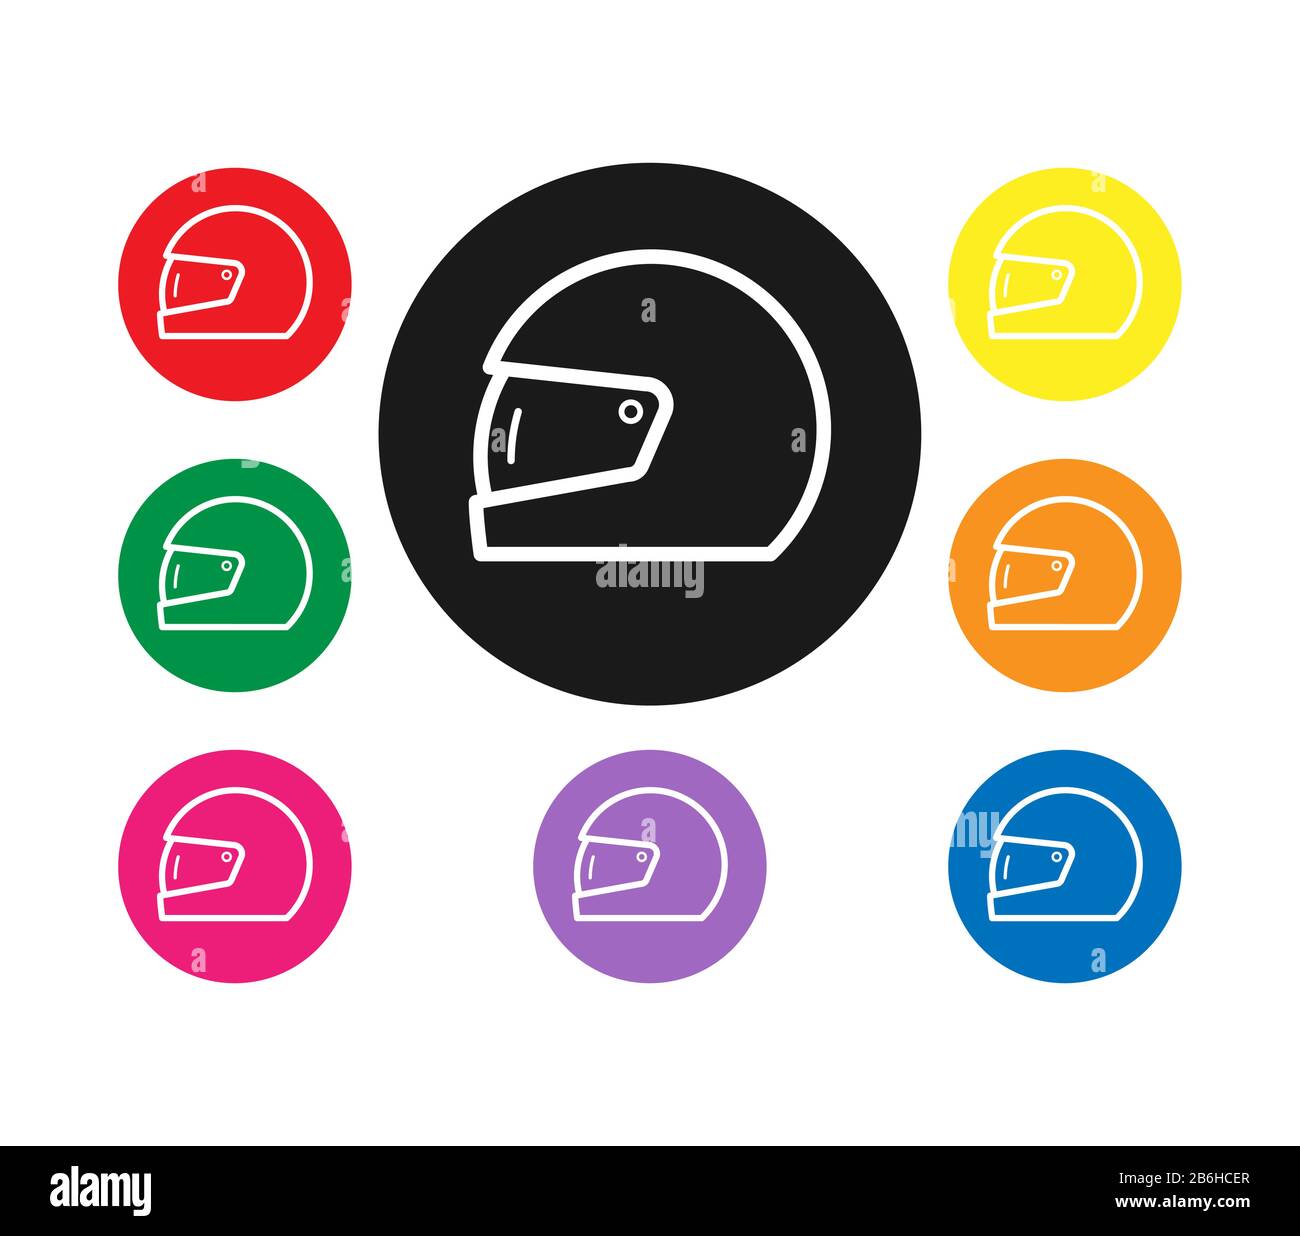 Set of colored icons of the helmet. Simple flat design for websites and apps Stock Vector